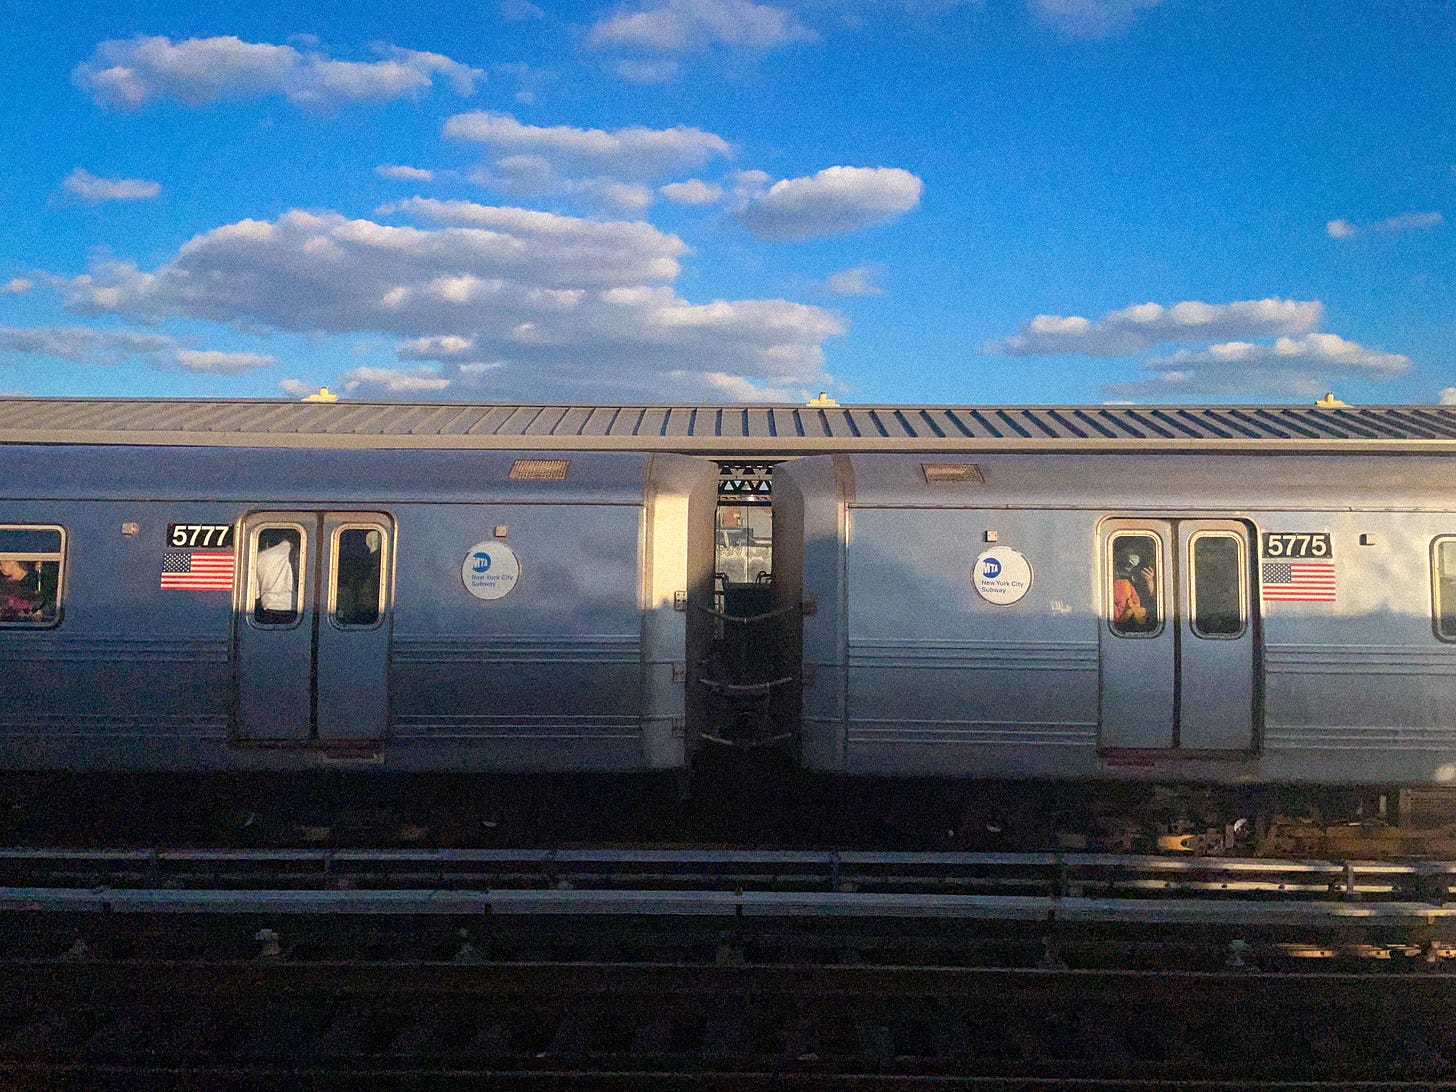 A NYC subway train under a blue sky dotted with clouds.